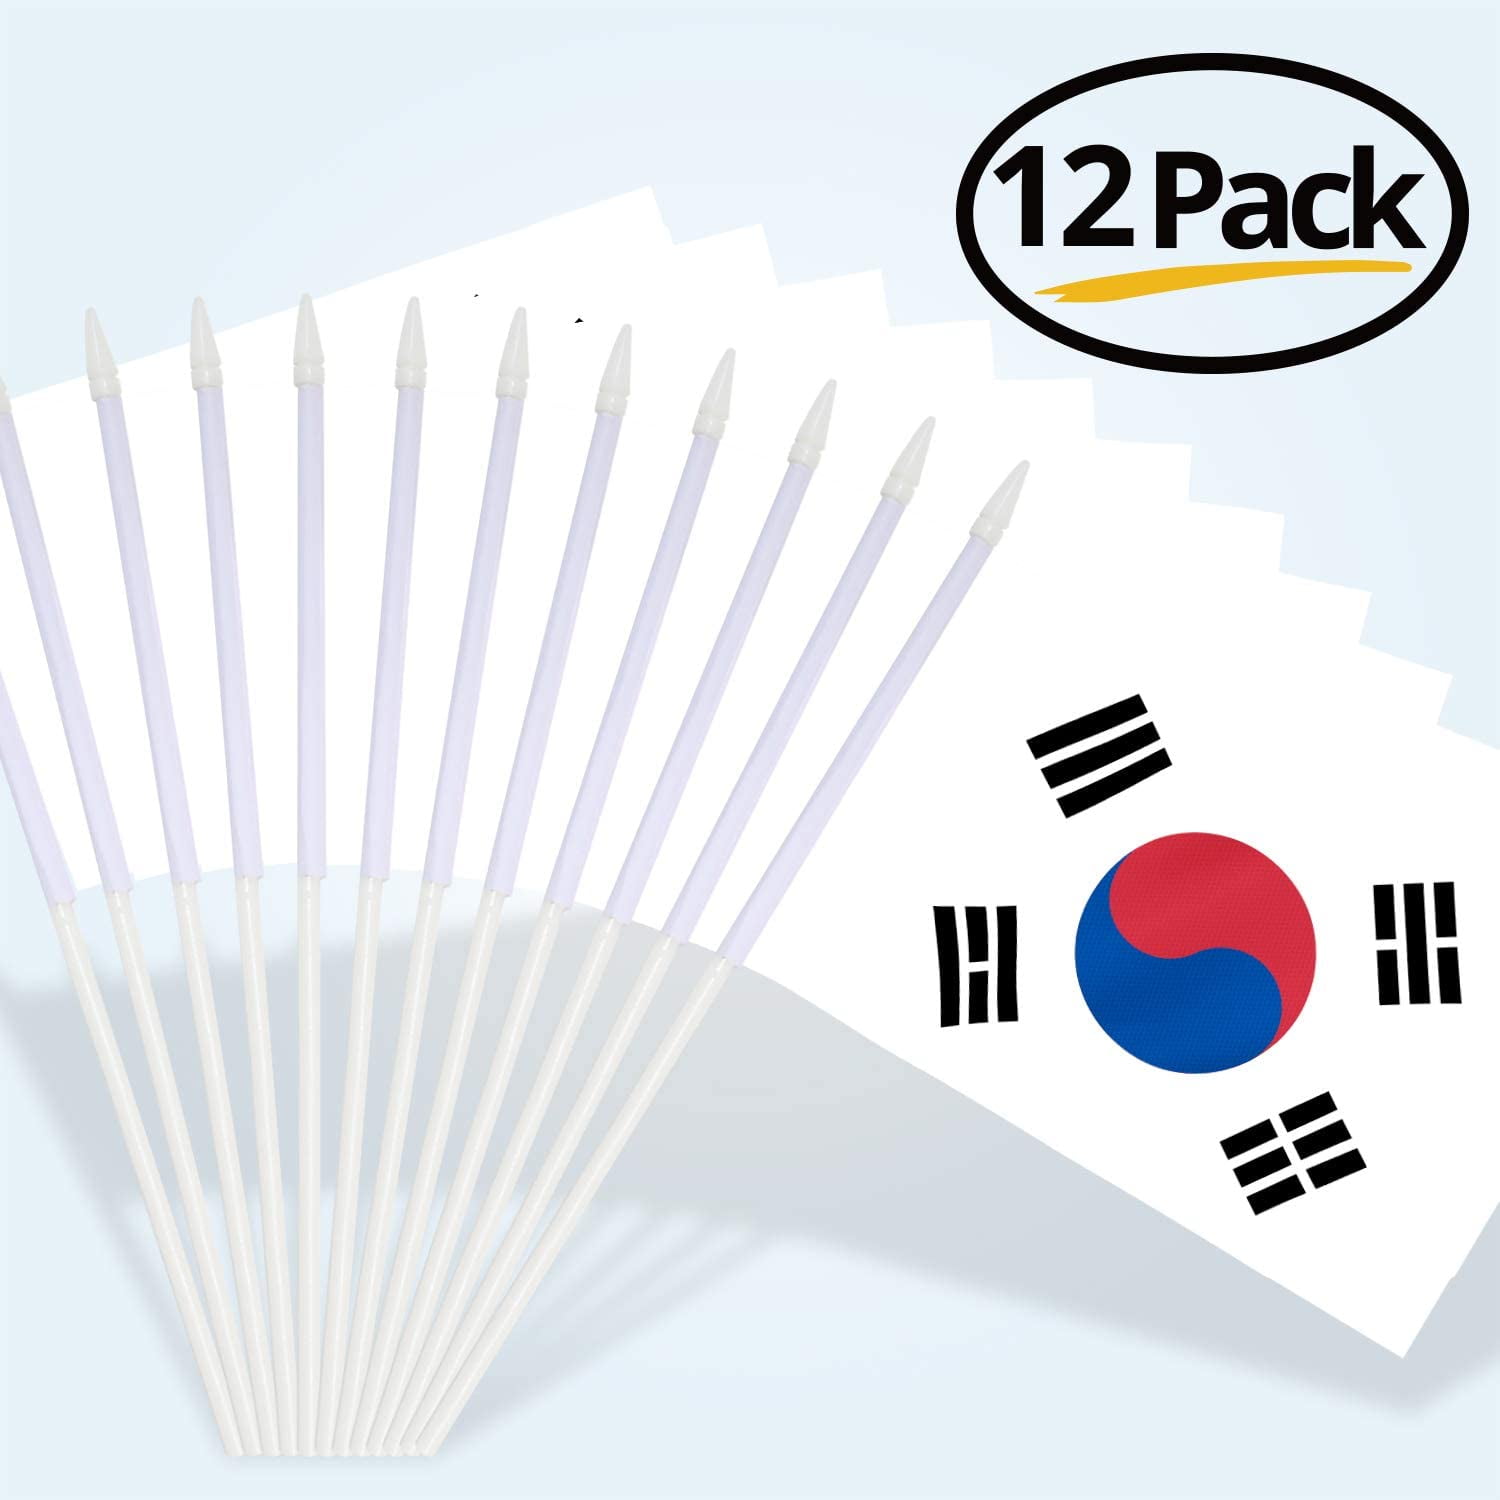 Hand Held Small Miniature Korean Flags 5x8 Inch Details about   Anley Korea Mini Flag 12 Pack 